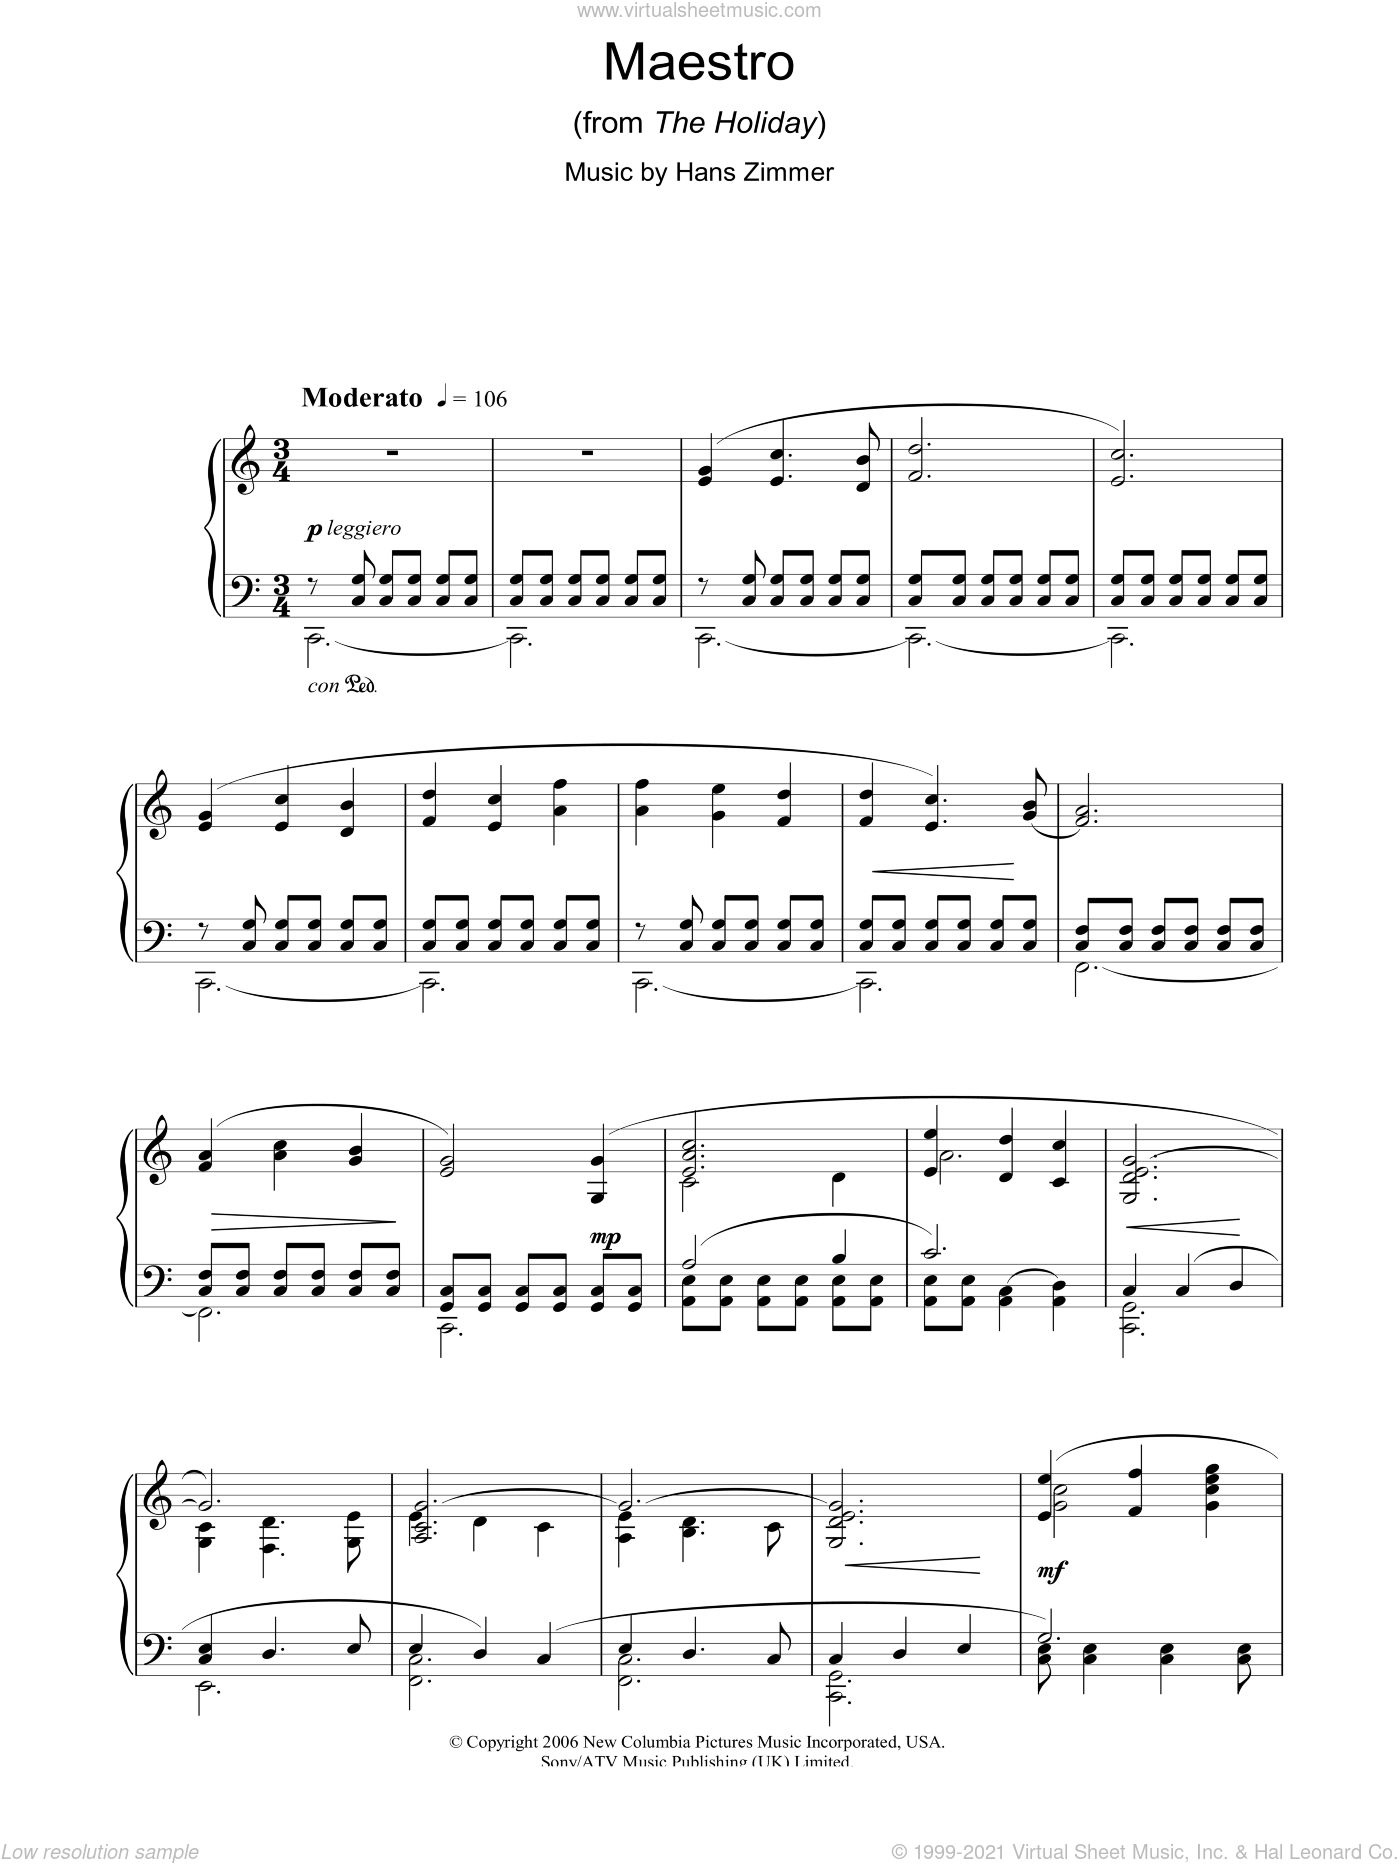 Zimmer - Maestro (from The Holiday) sheet music for piano solo